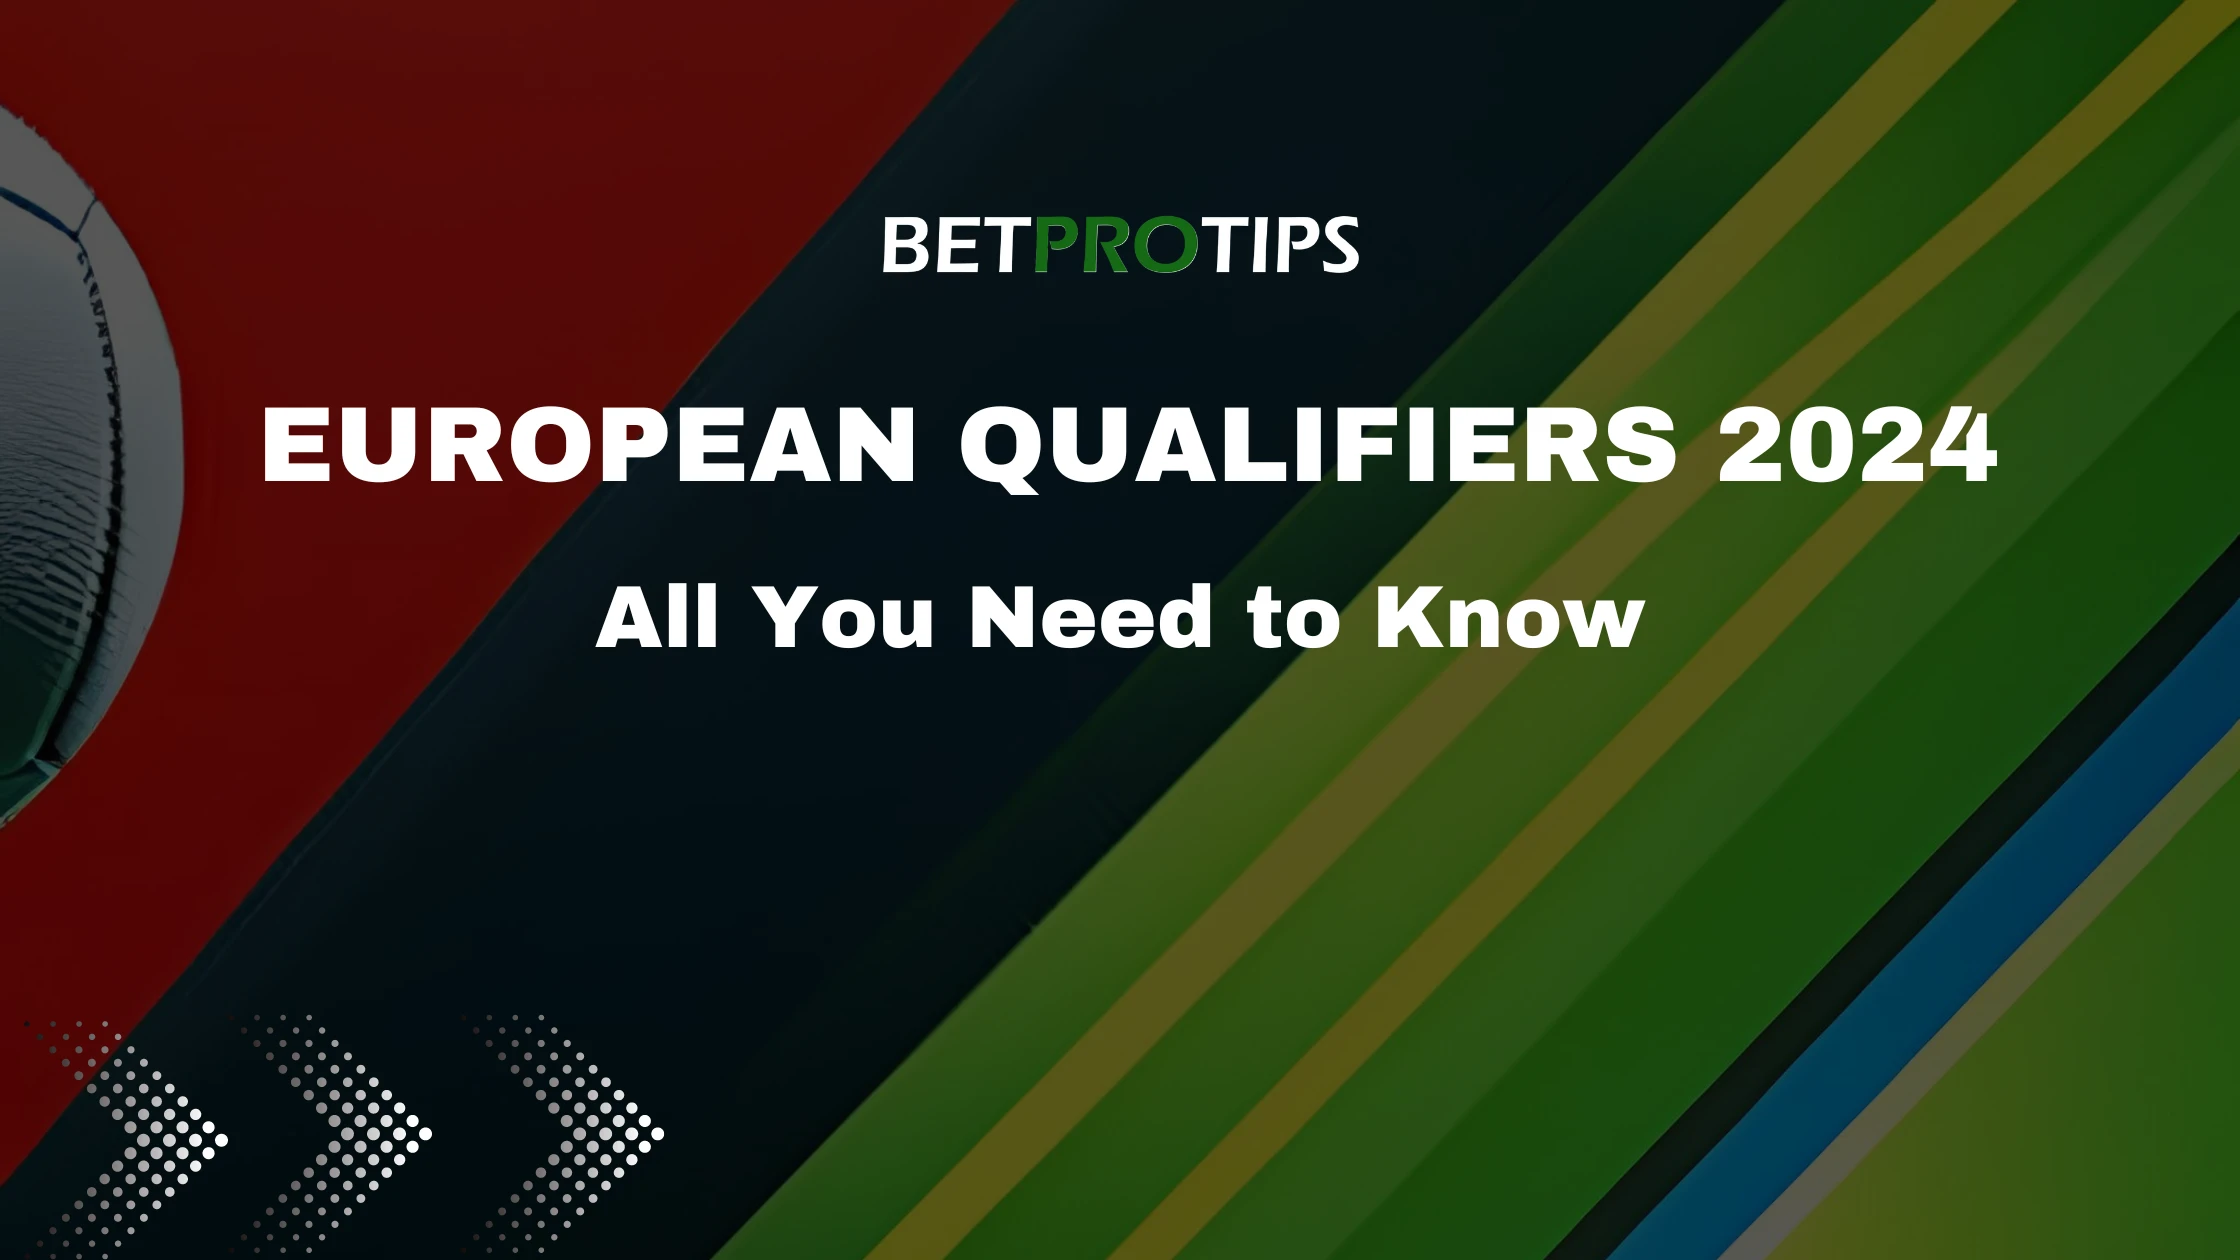 European Qualifiers 2024 All You Need to Know